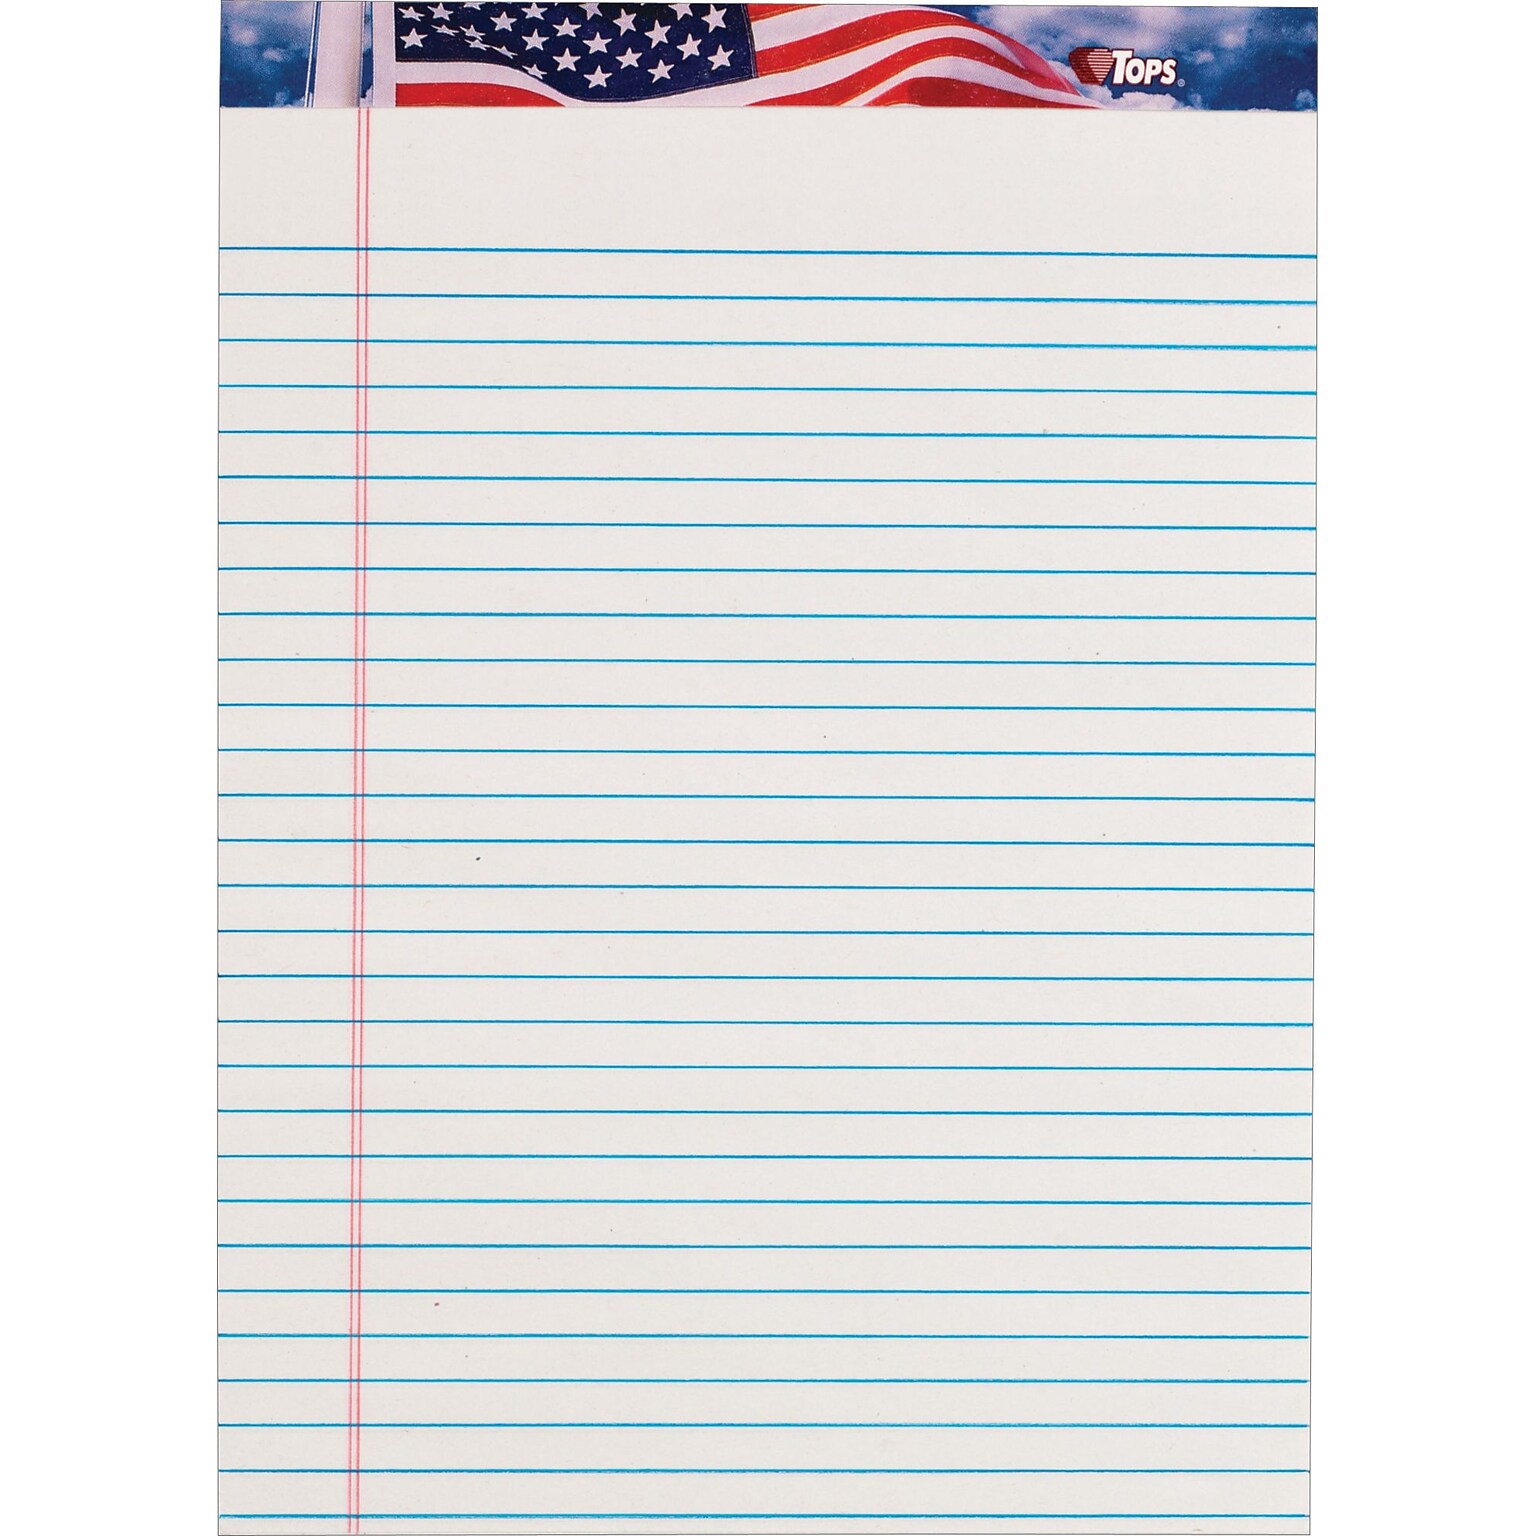 TOPS Recycled American Pride Writing Tablet, 8-1/2 x 11-3/4, Legal Ruled, White, 50 Sheets/Pad, 12 Pads/Pack (75140)